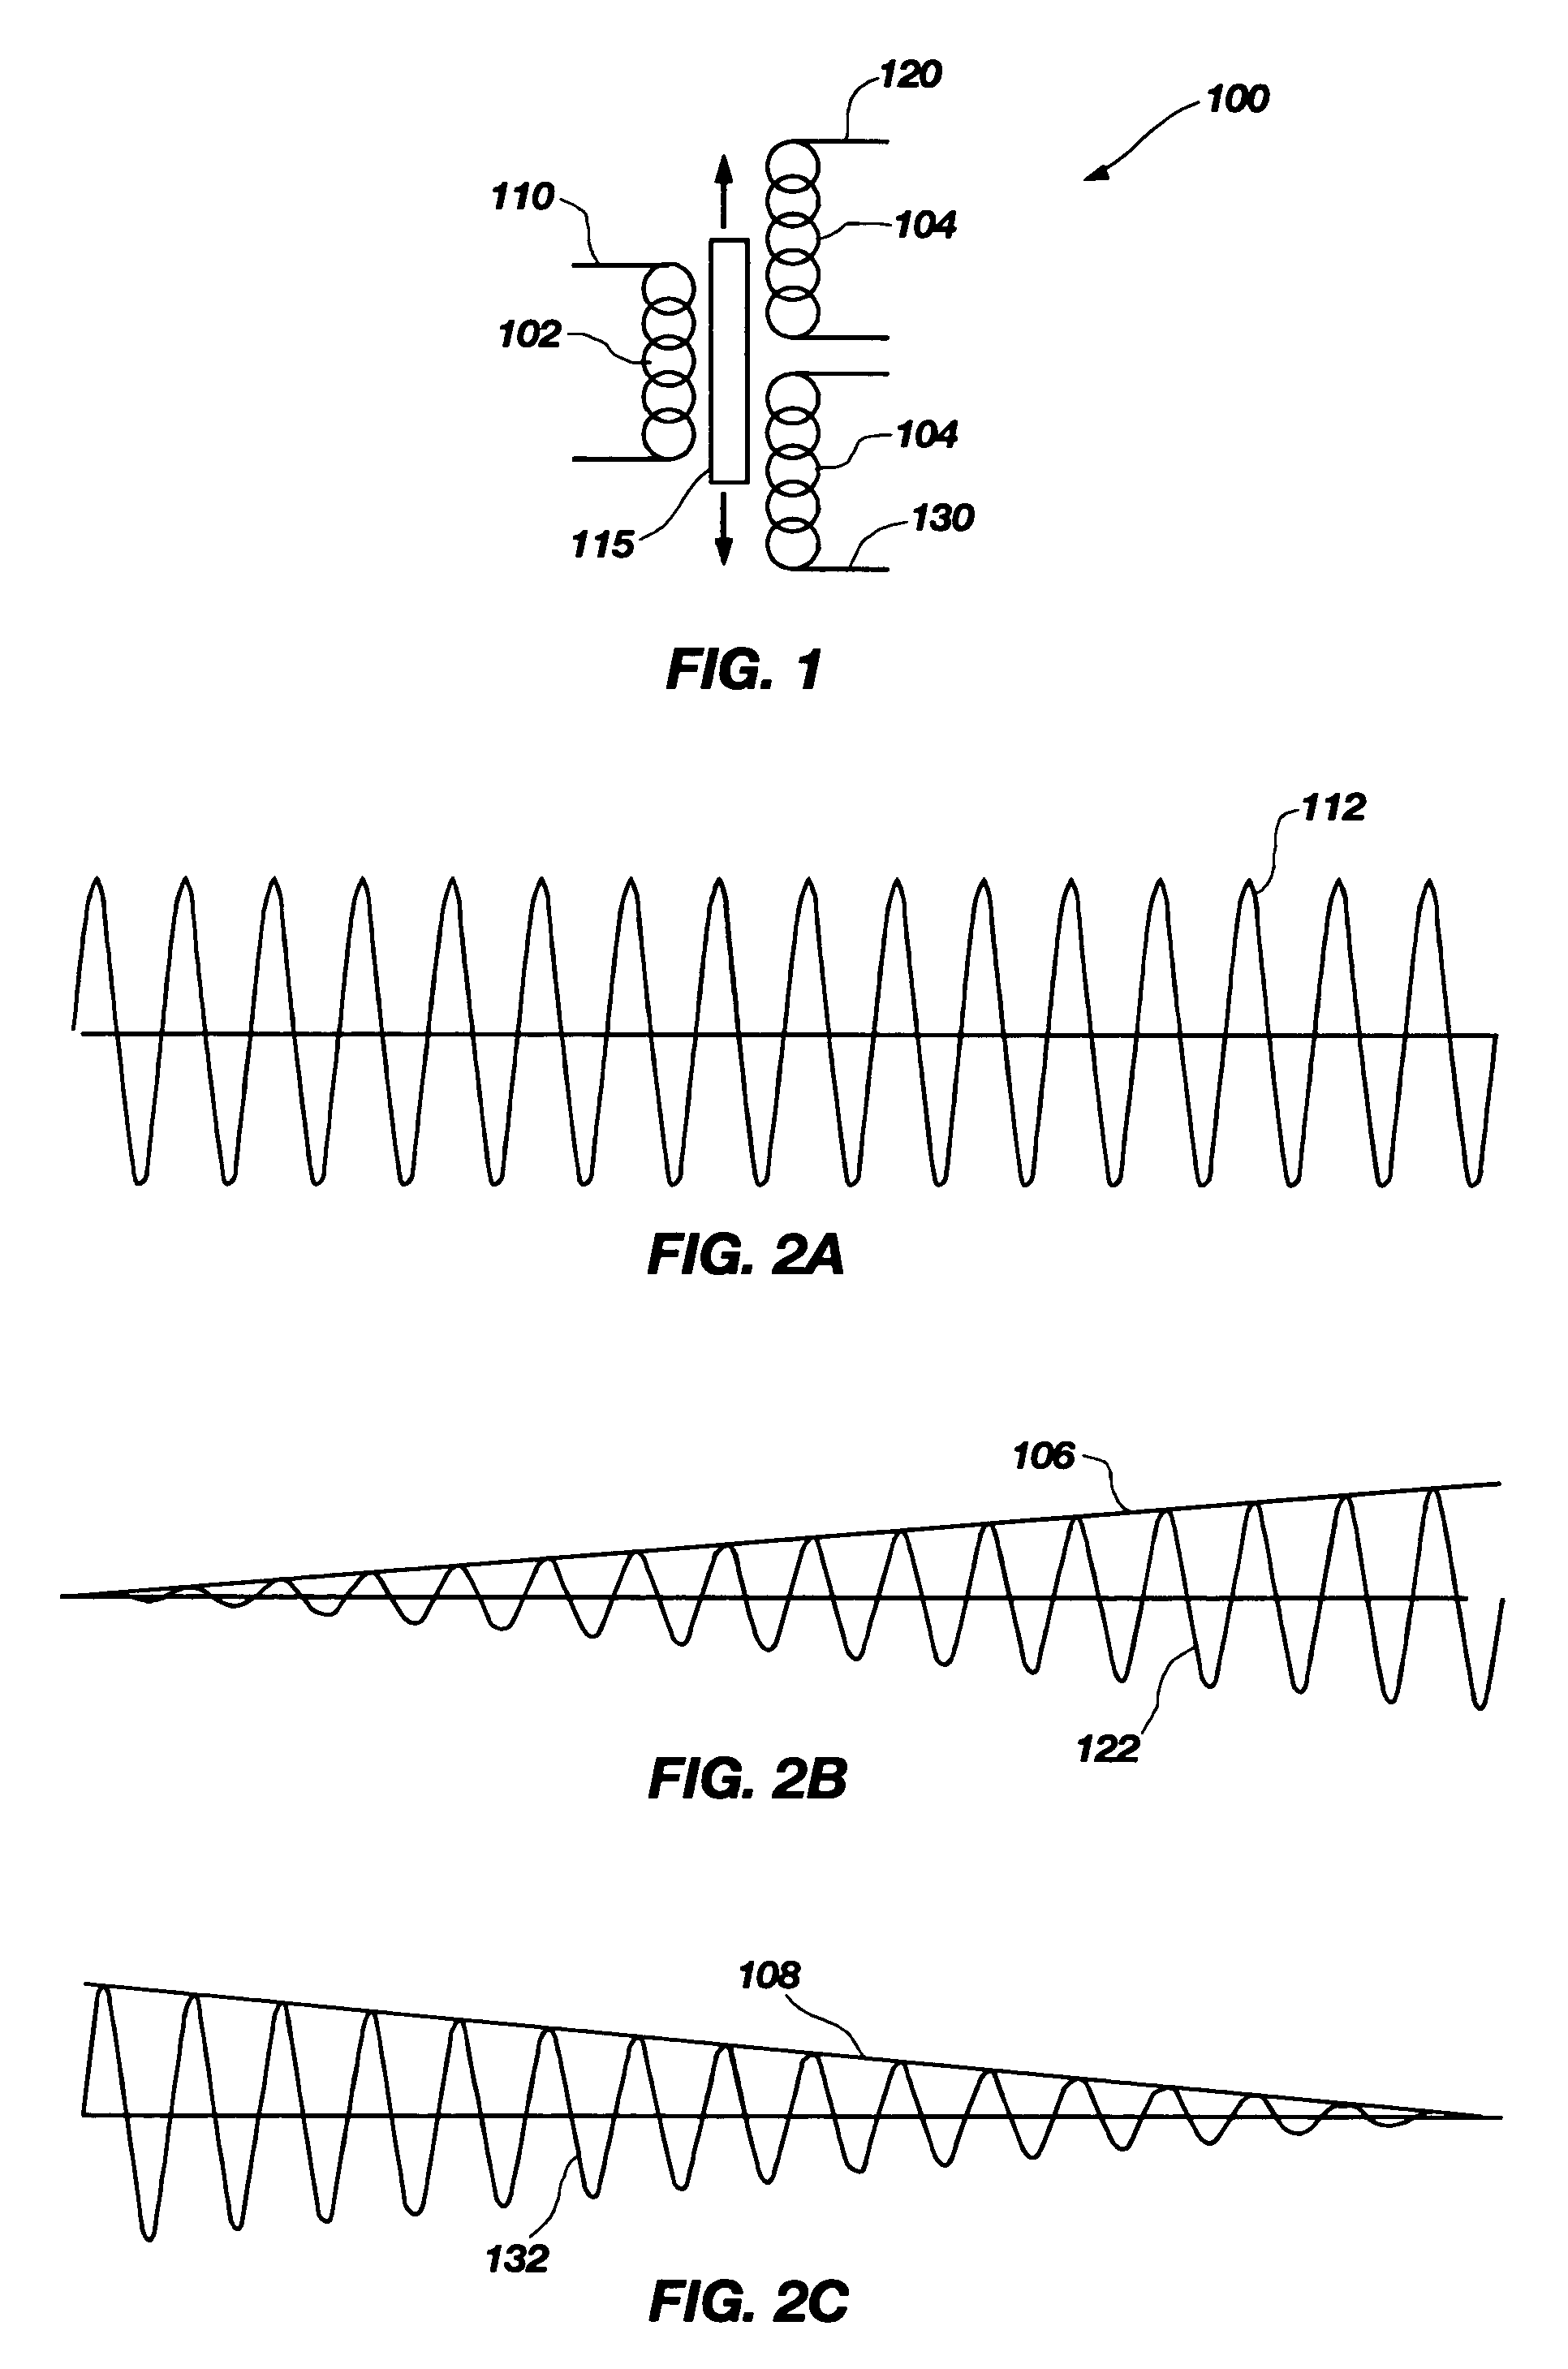 Digital method and apparatus for sensing position with a linear variable differential transformer